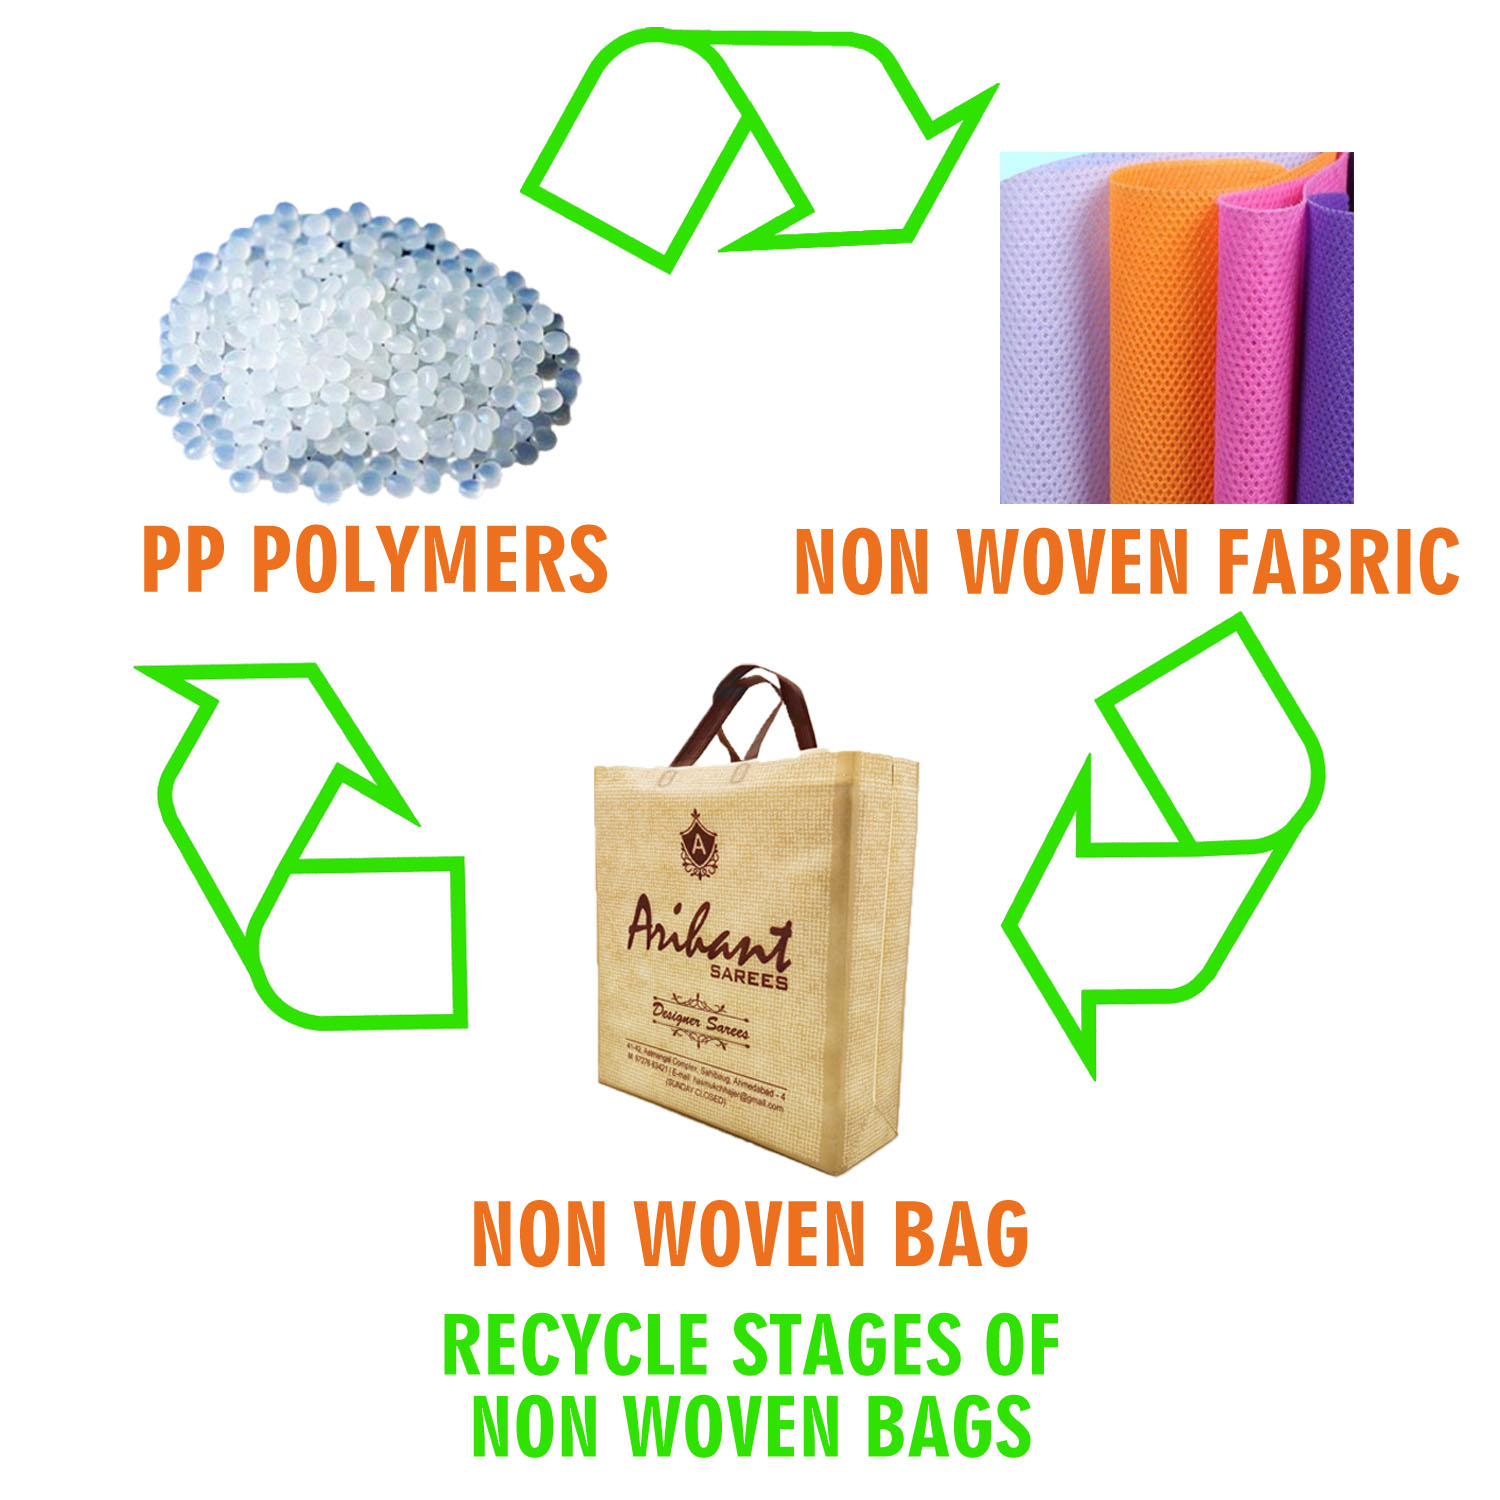 100% Recyclable Bags